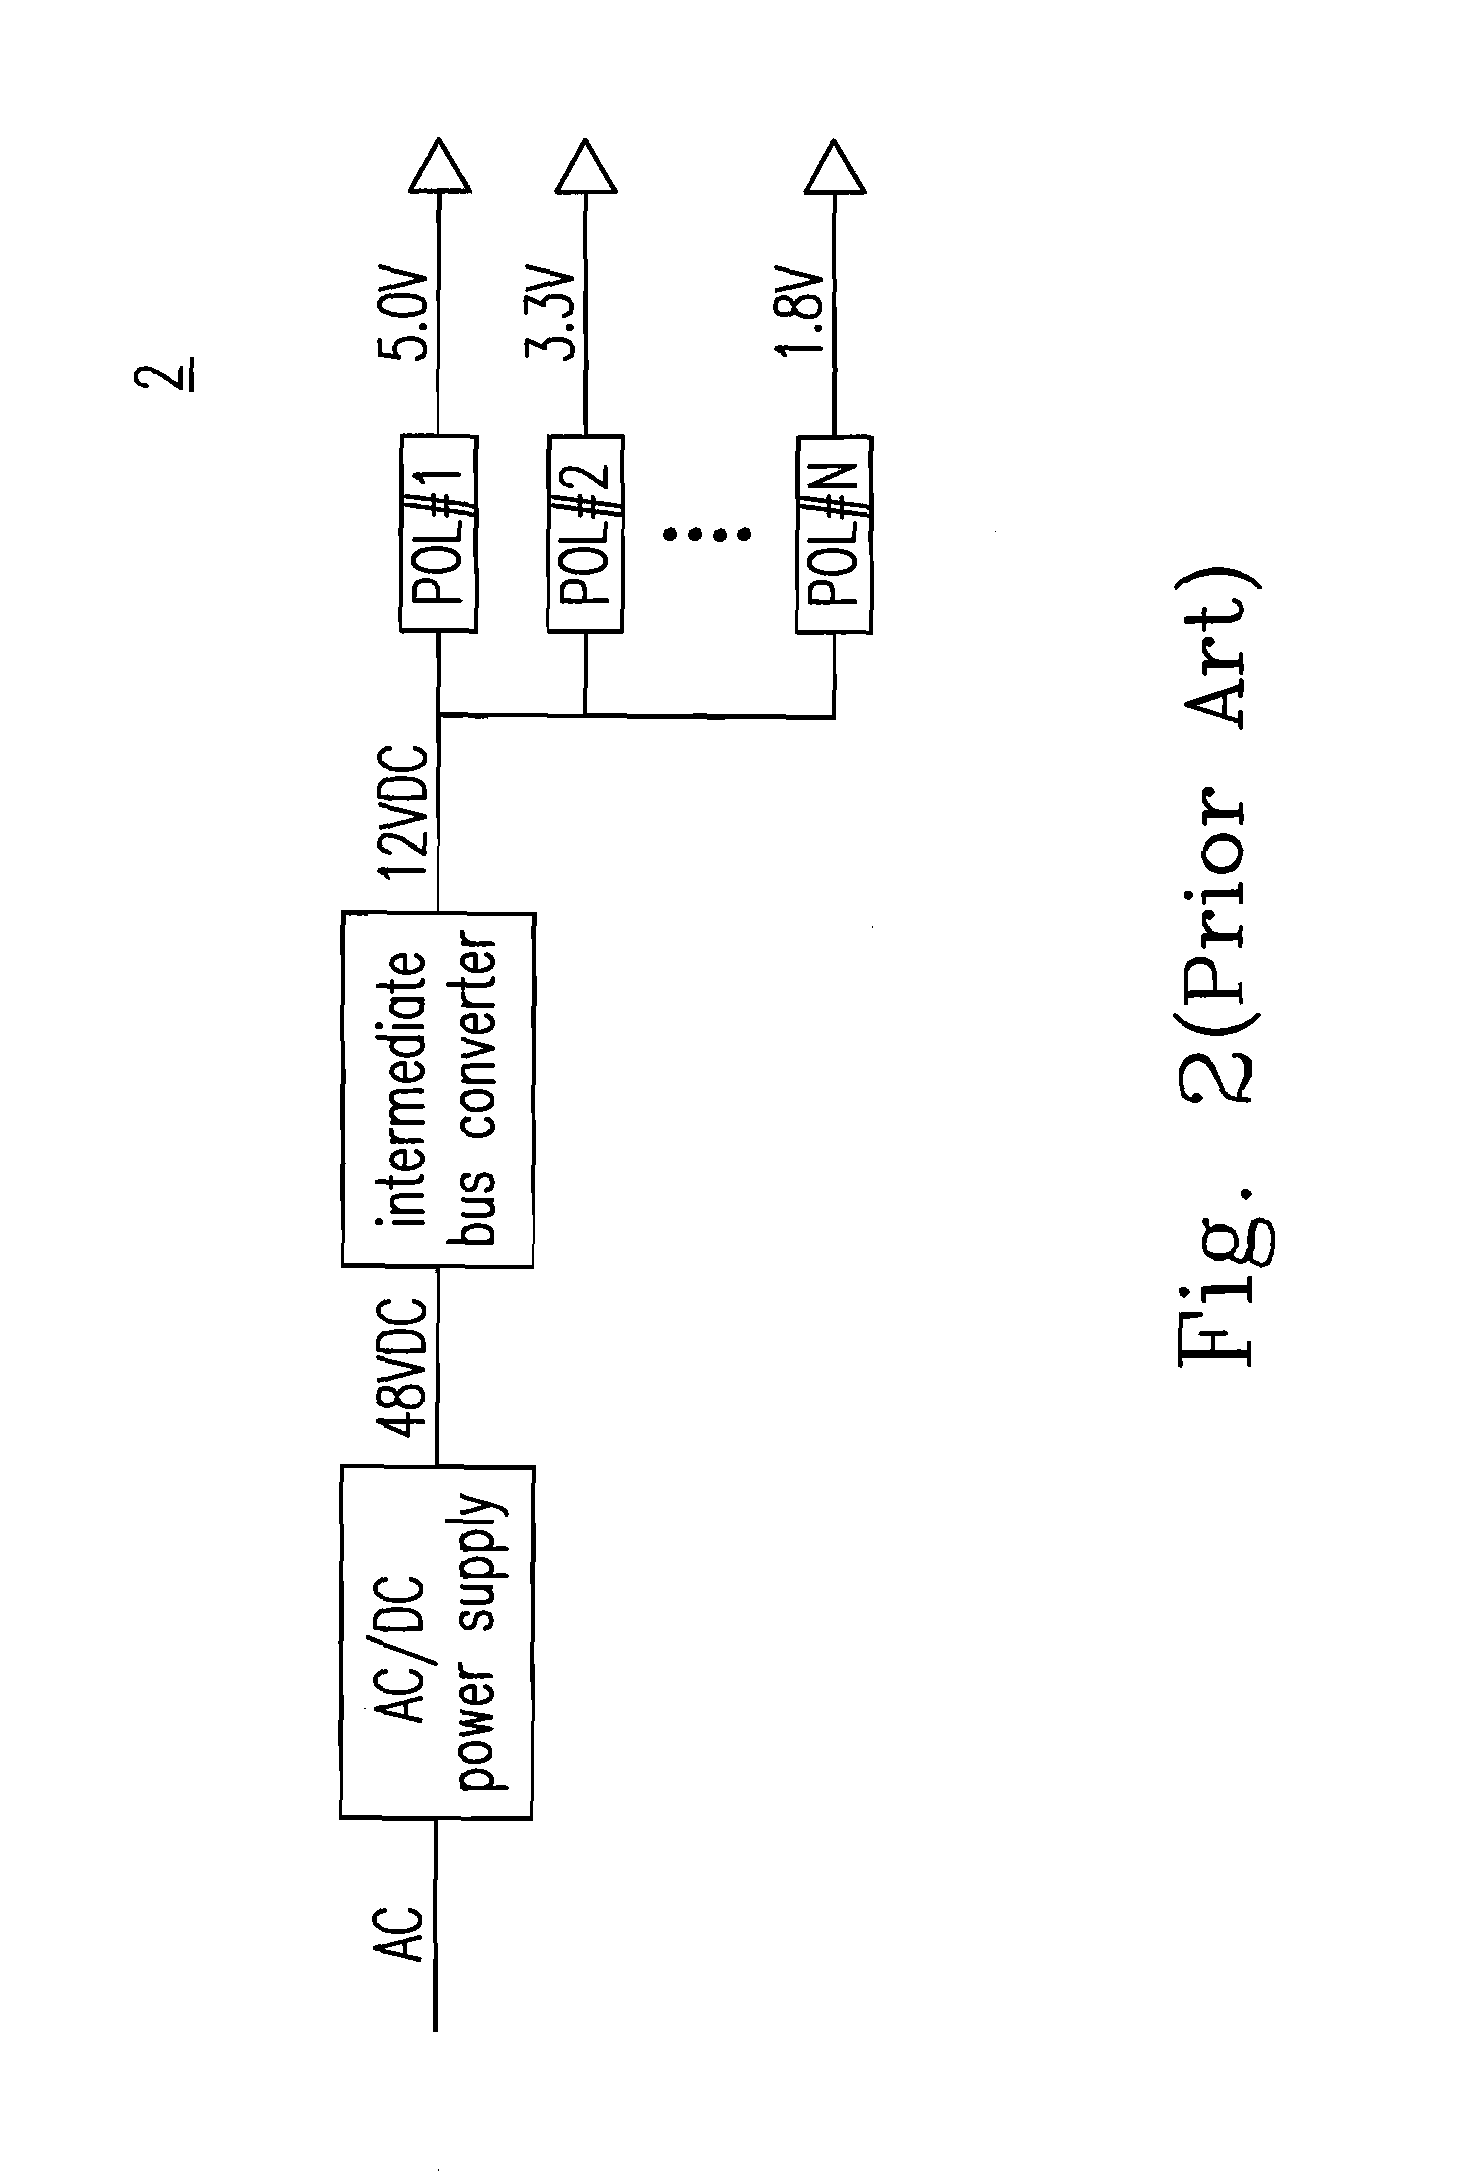 Distributed power architecture having centralized control unit